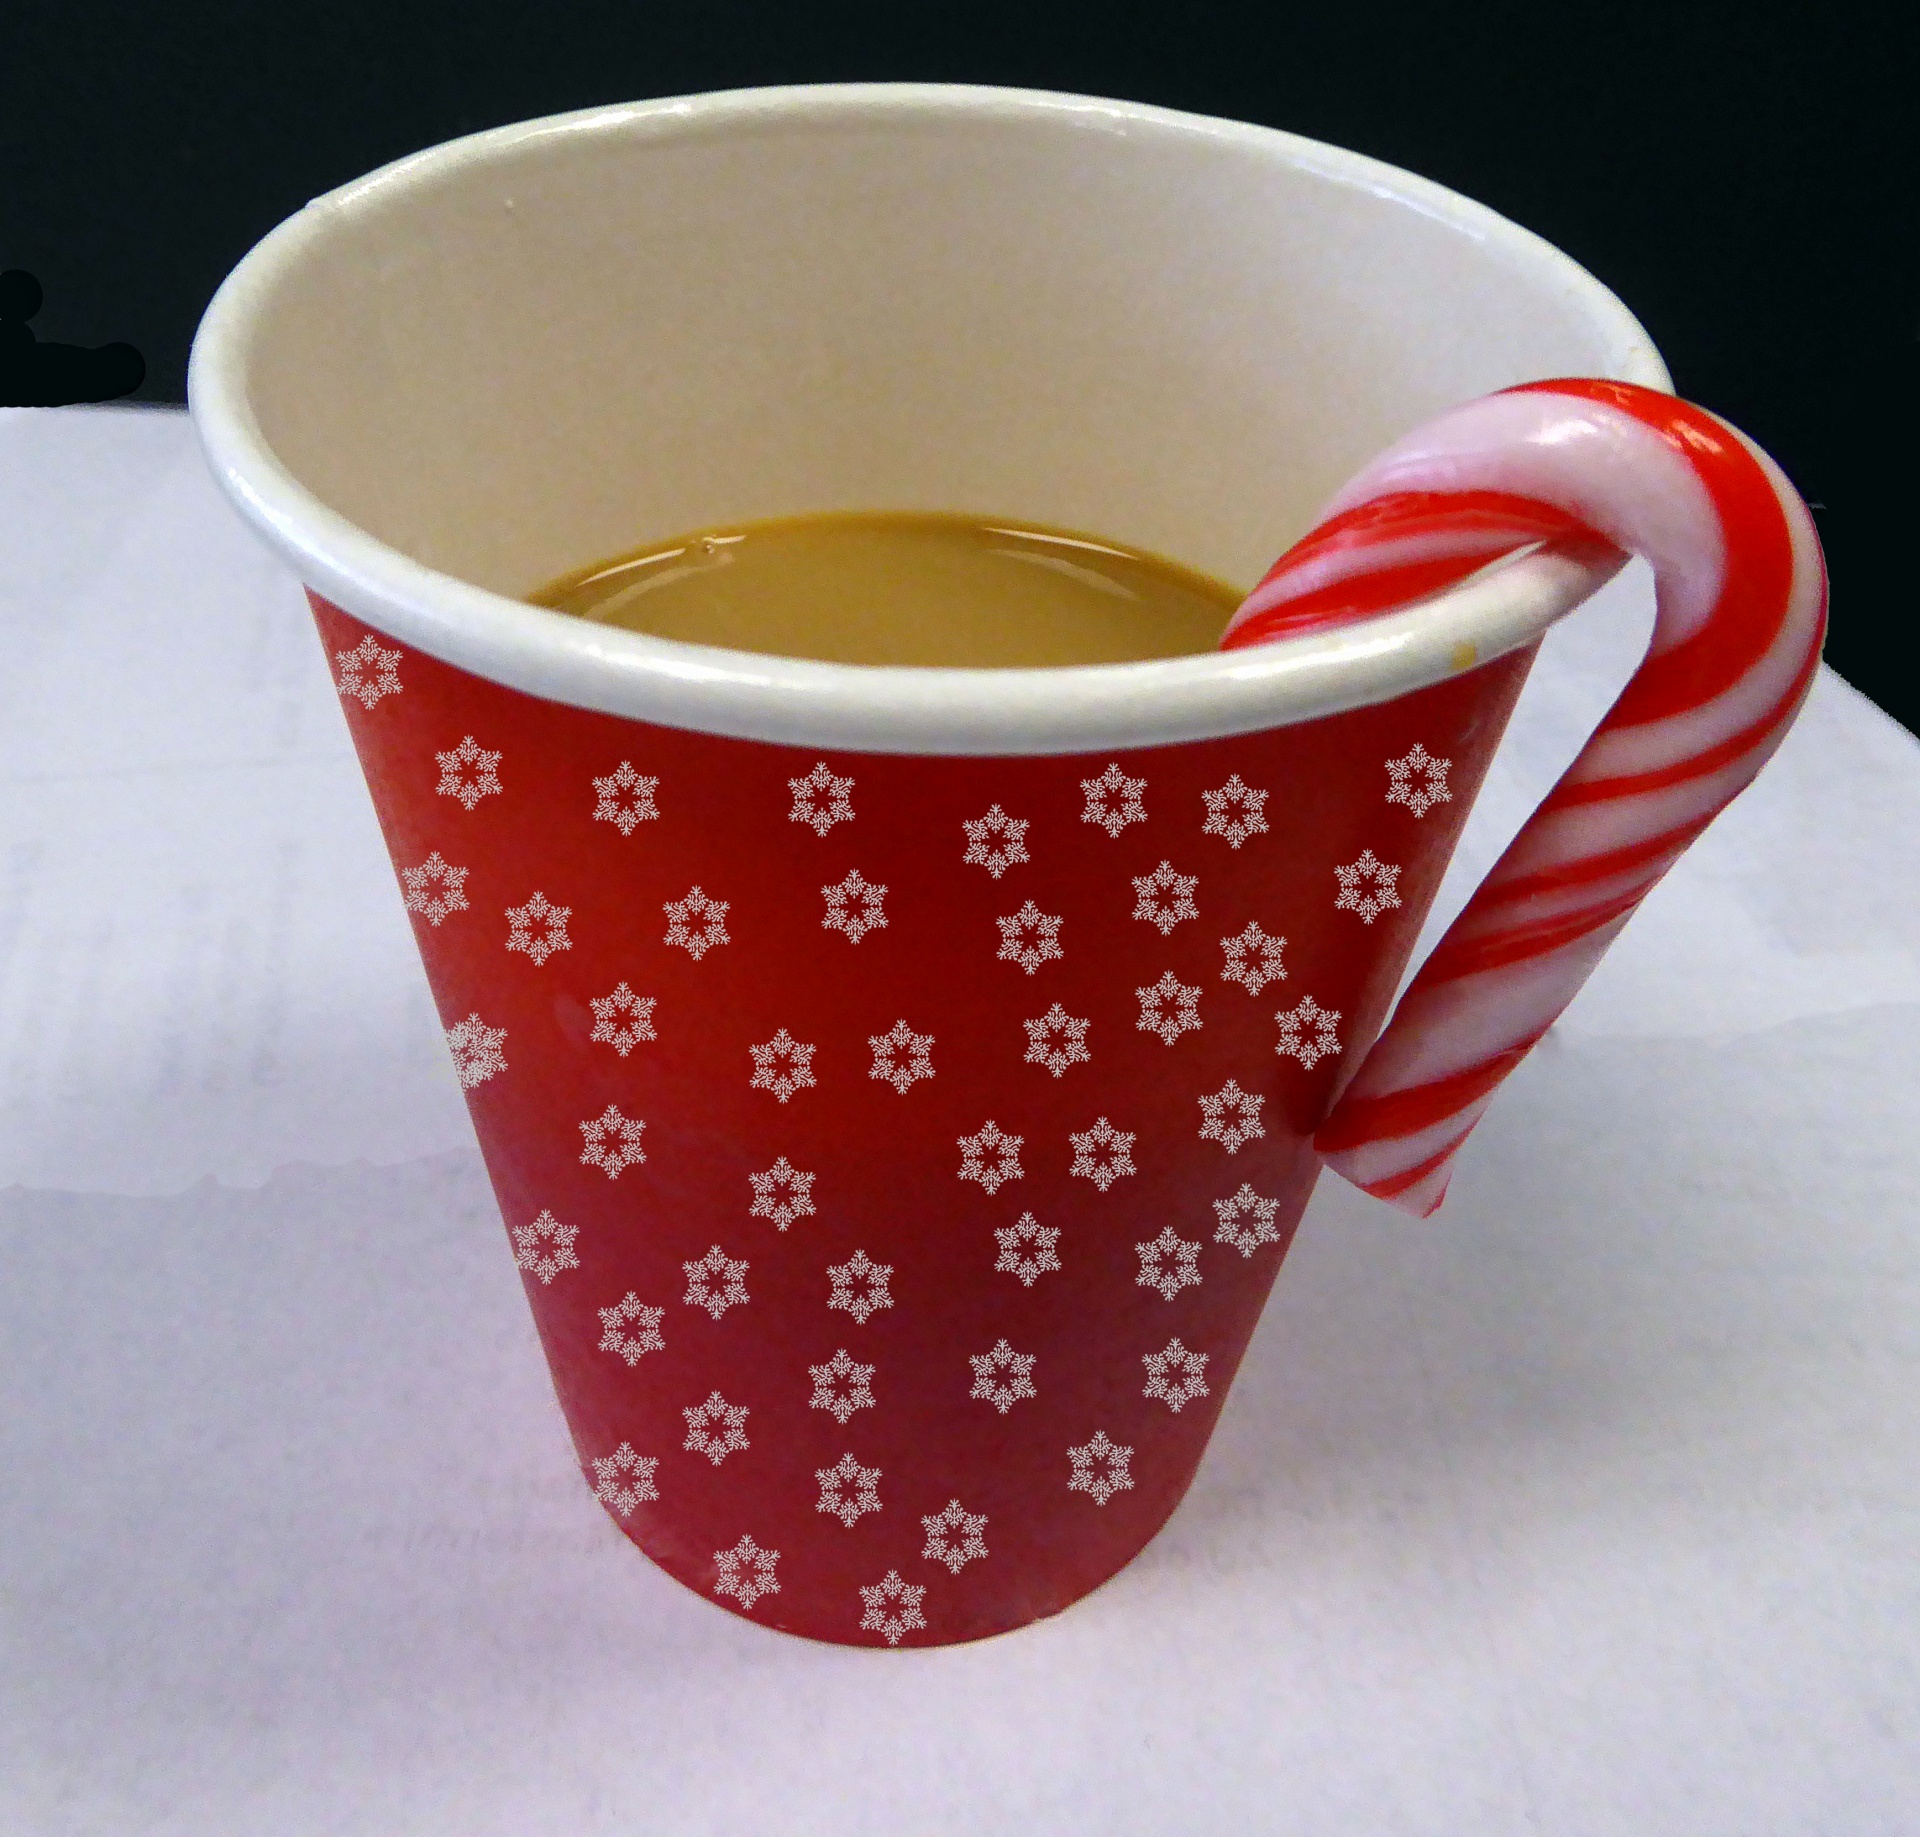 coffee christmas paper cup free photo